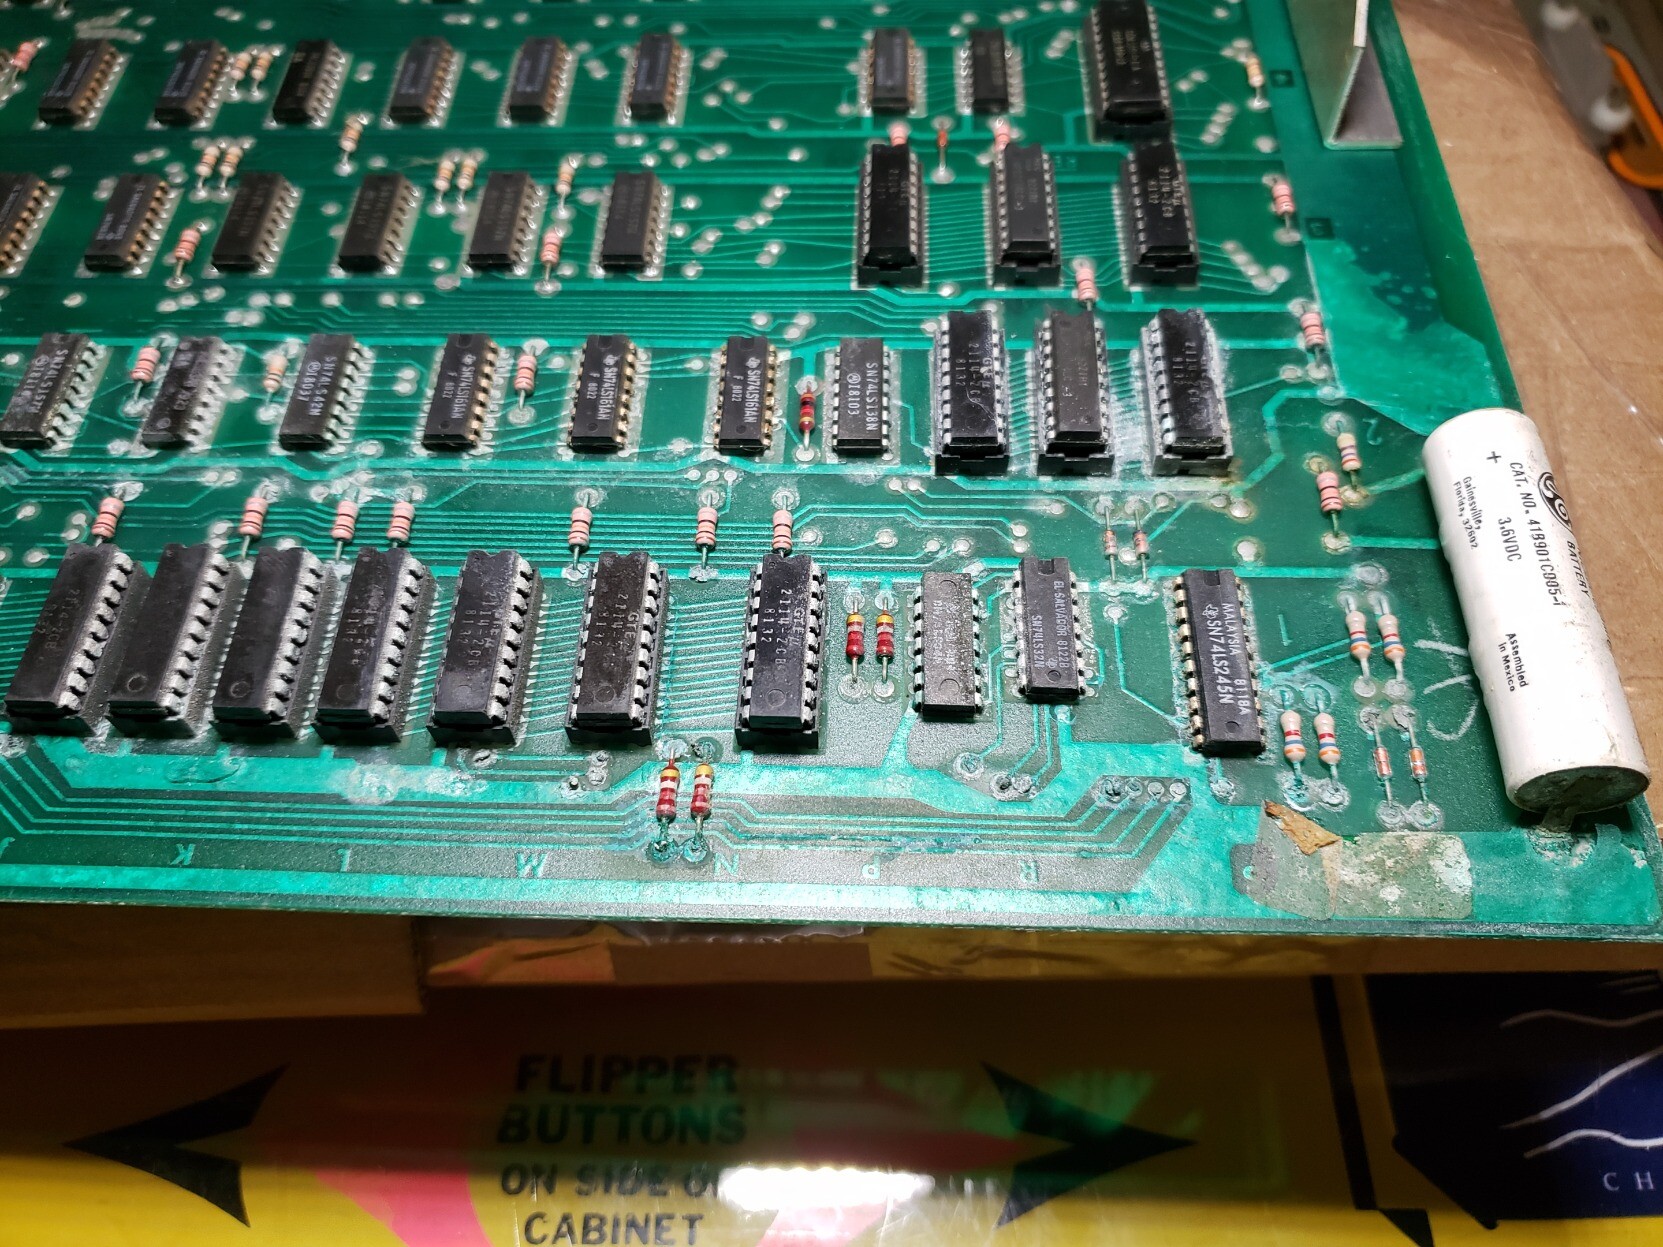 An arcade game PC board with visible corrosion from the still in-place leaking battery